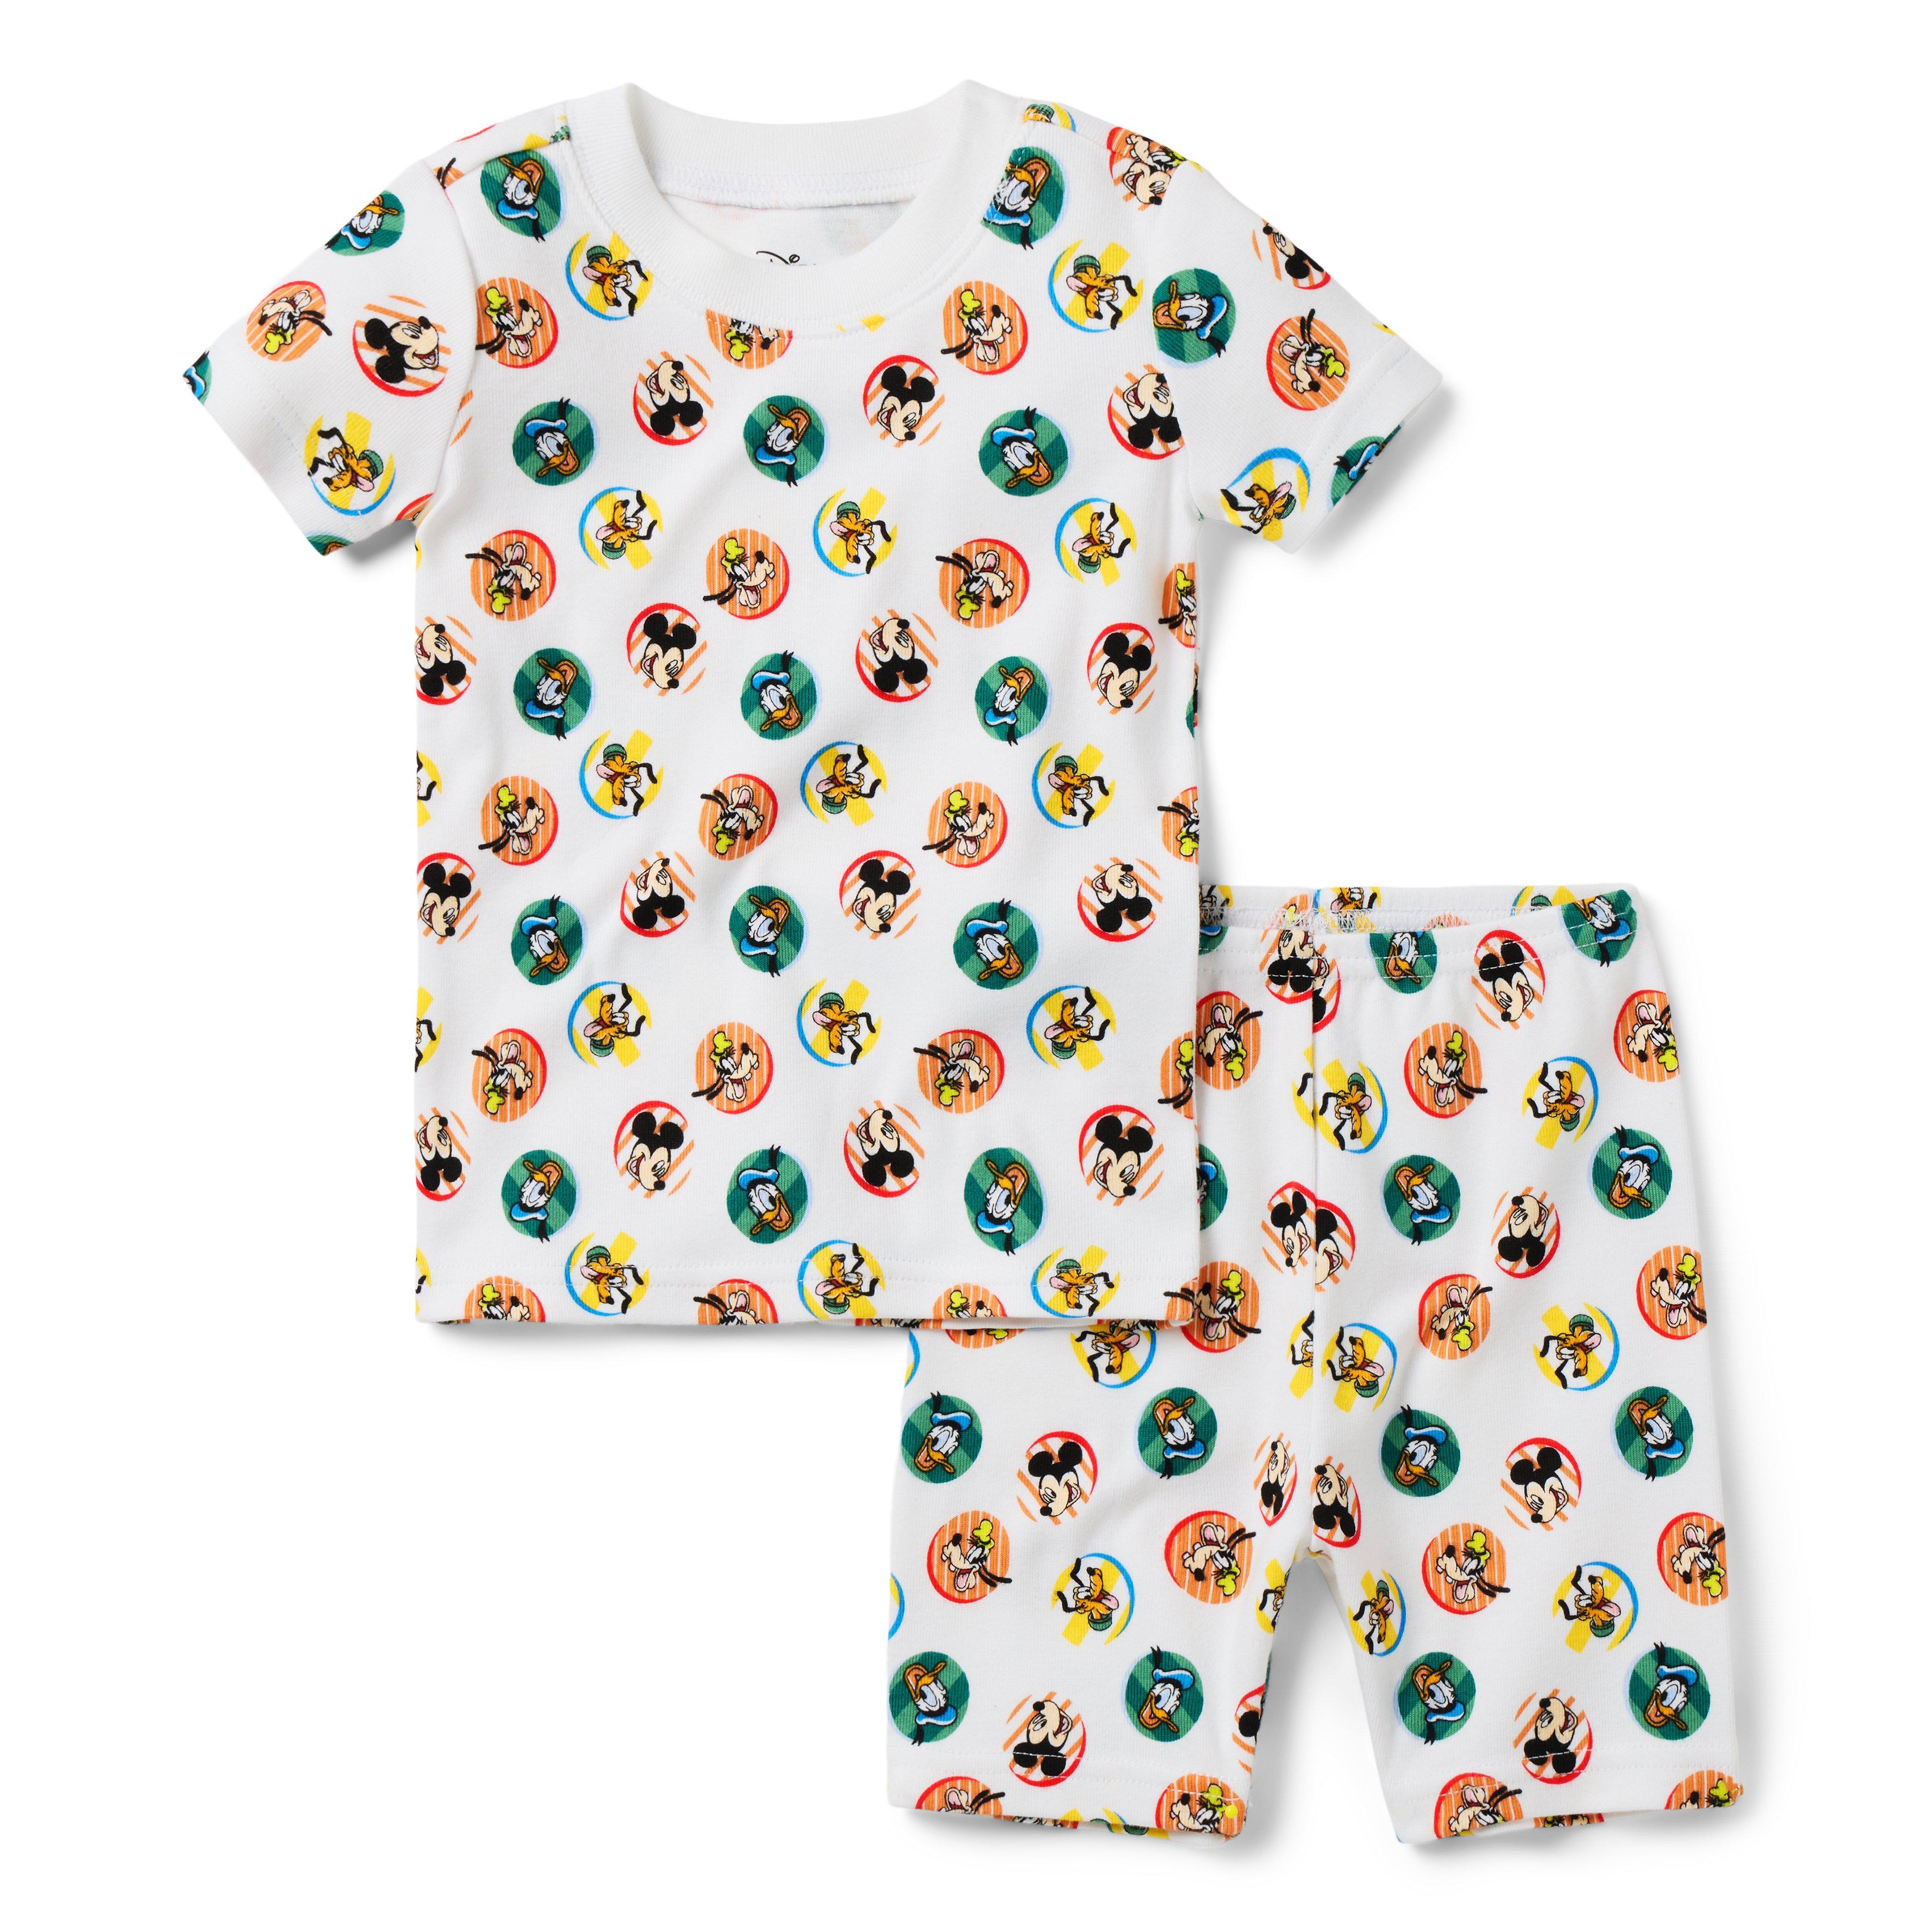 Good Night Short Pajama in Disney Mickey Mouse Friends image number 0